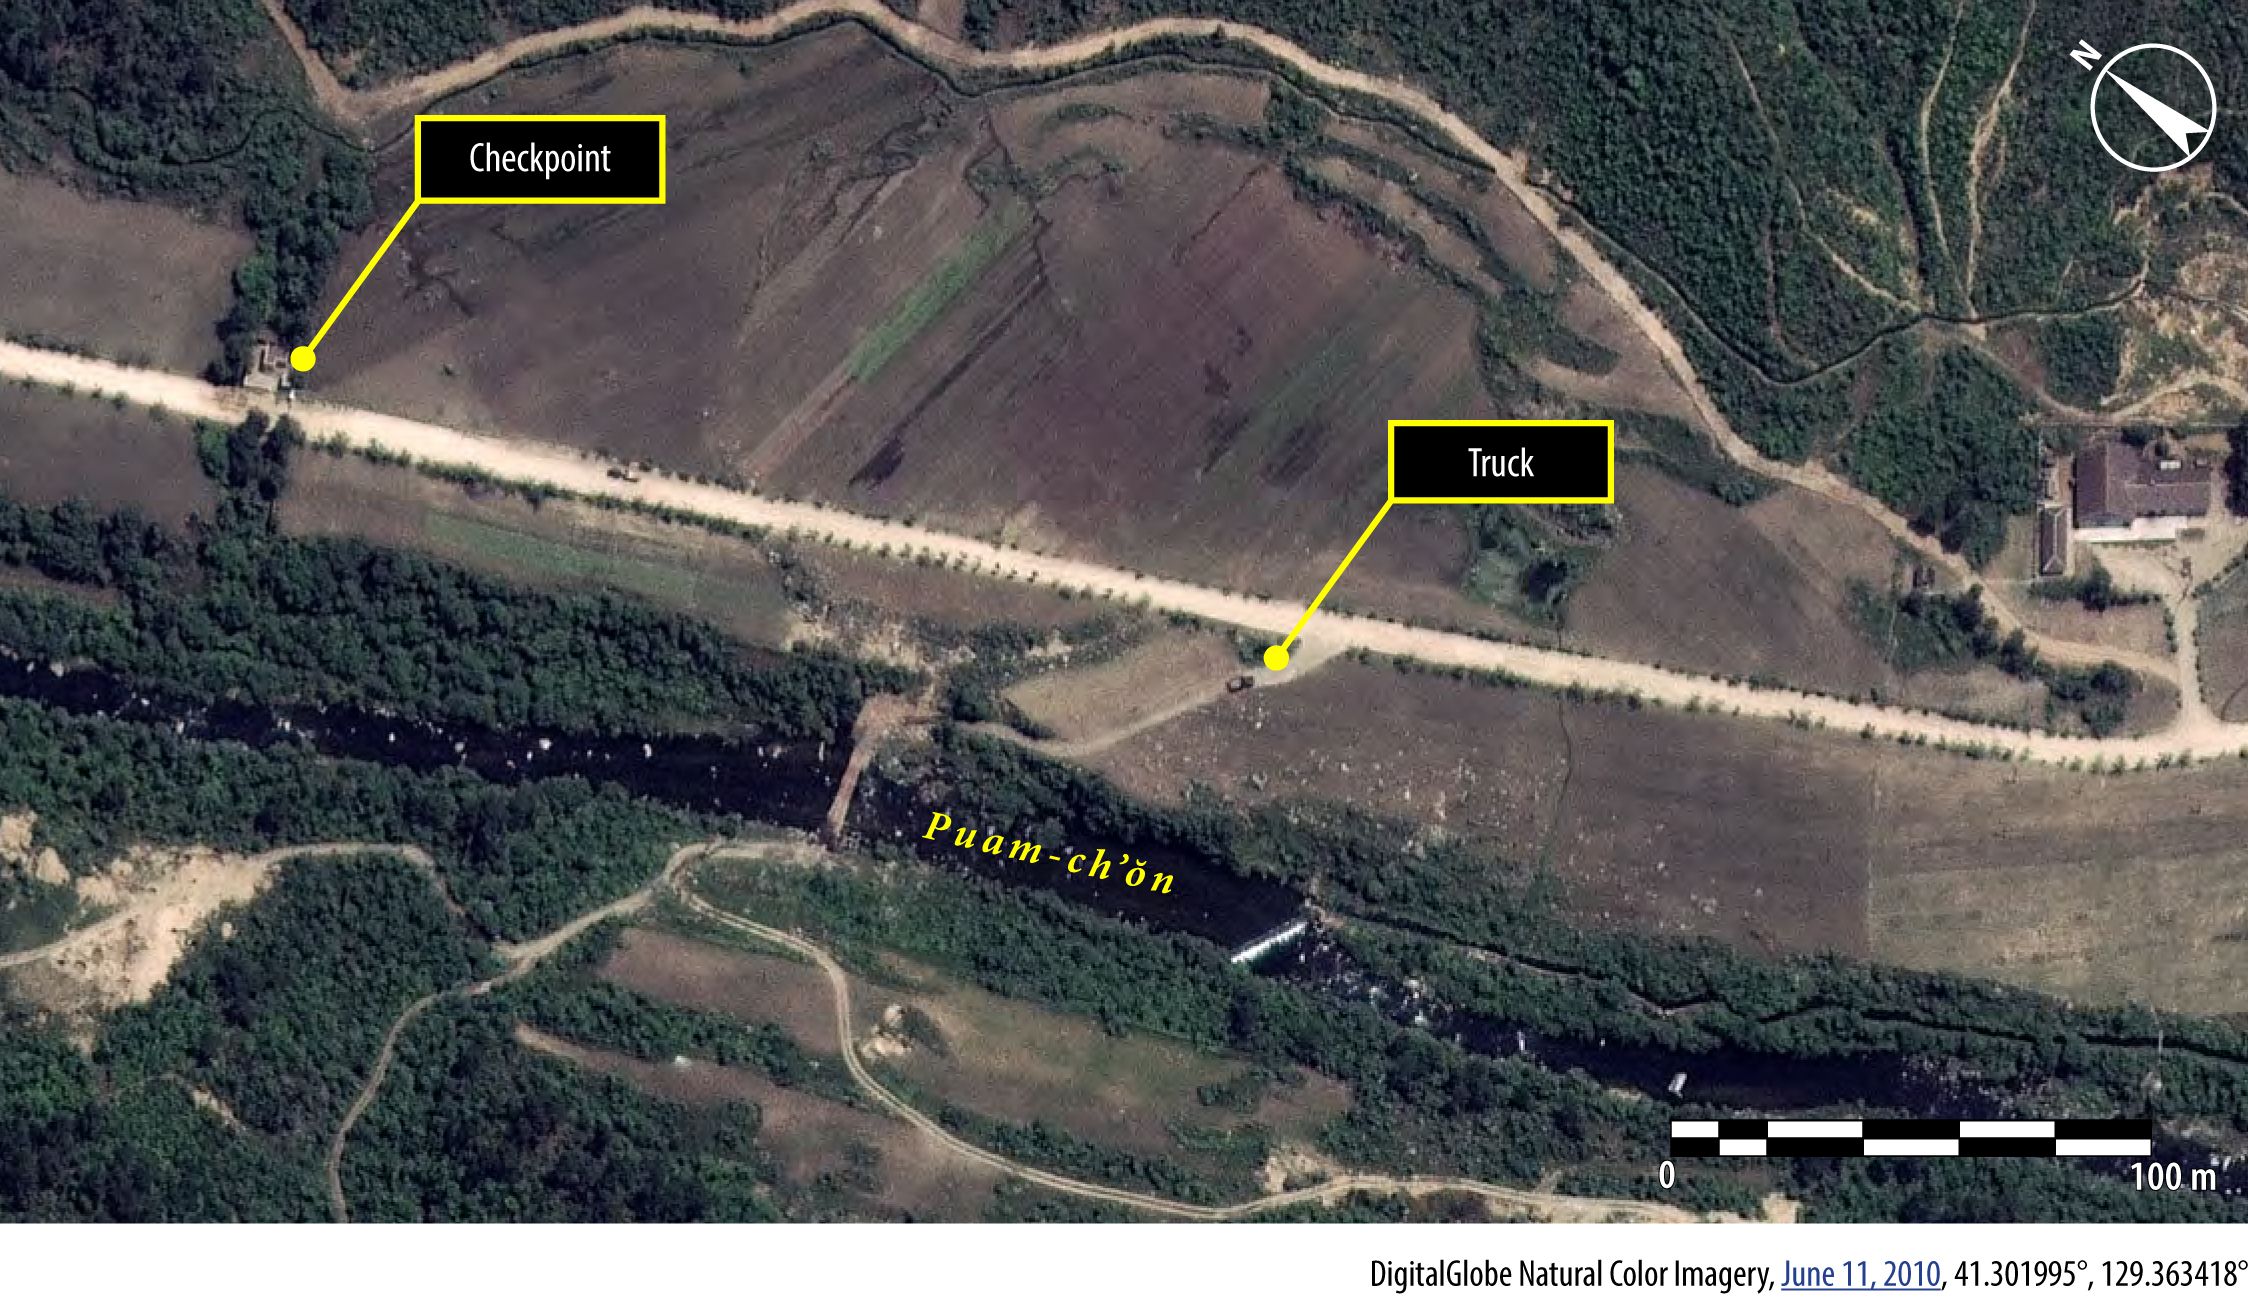 Satellite image of political prison camp Kwanliso 16, or Camp 16 released by Amnesty International. Photo: AFP